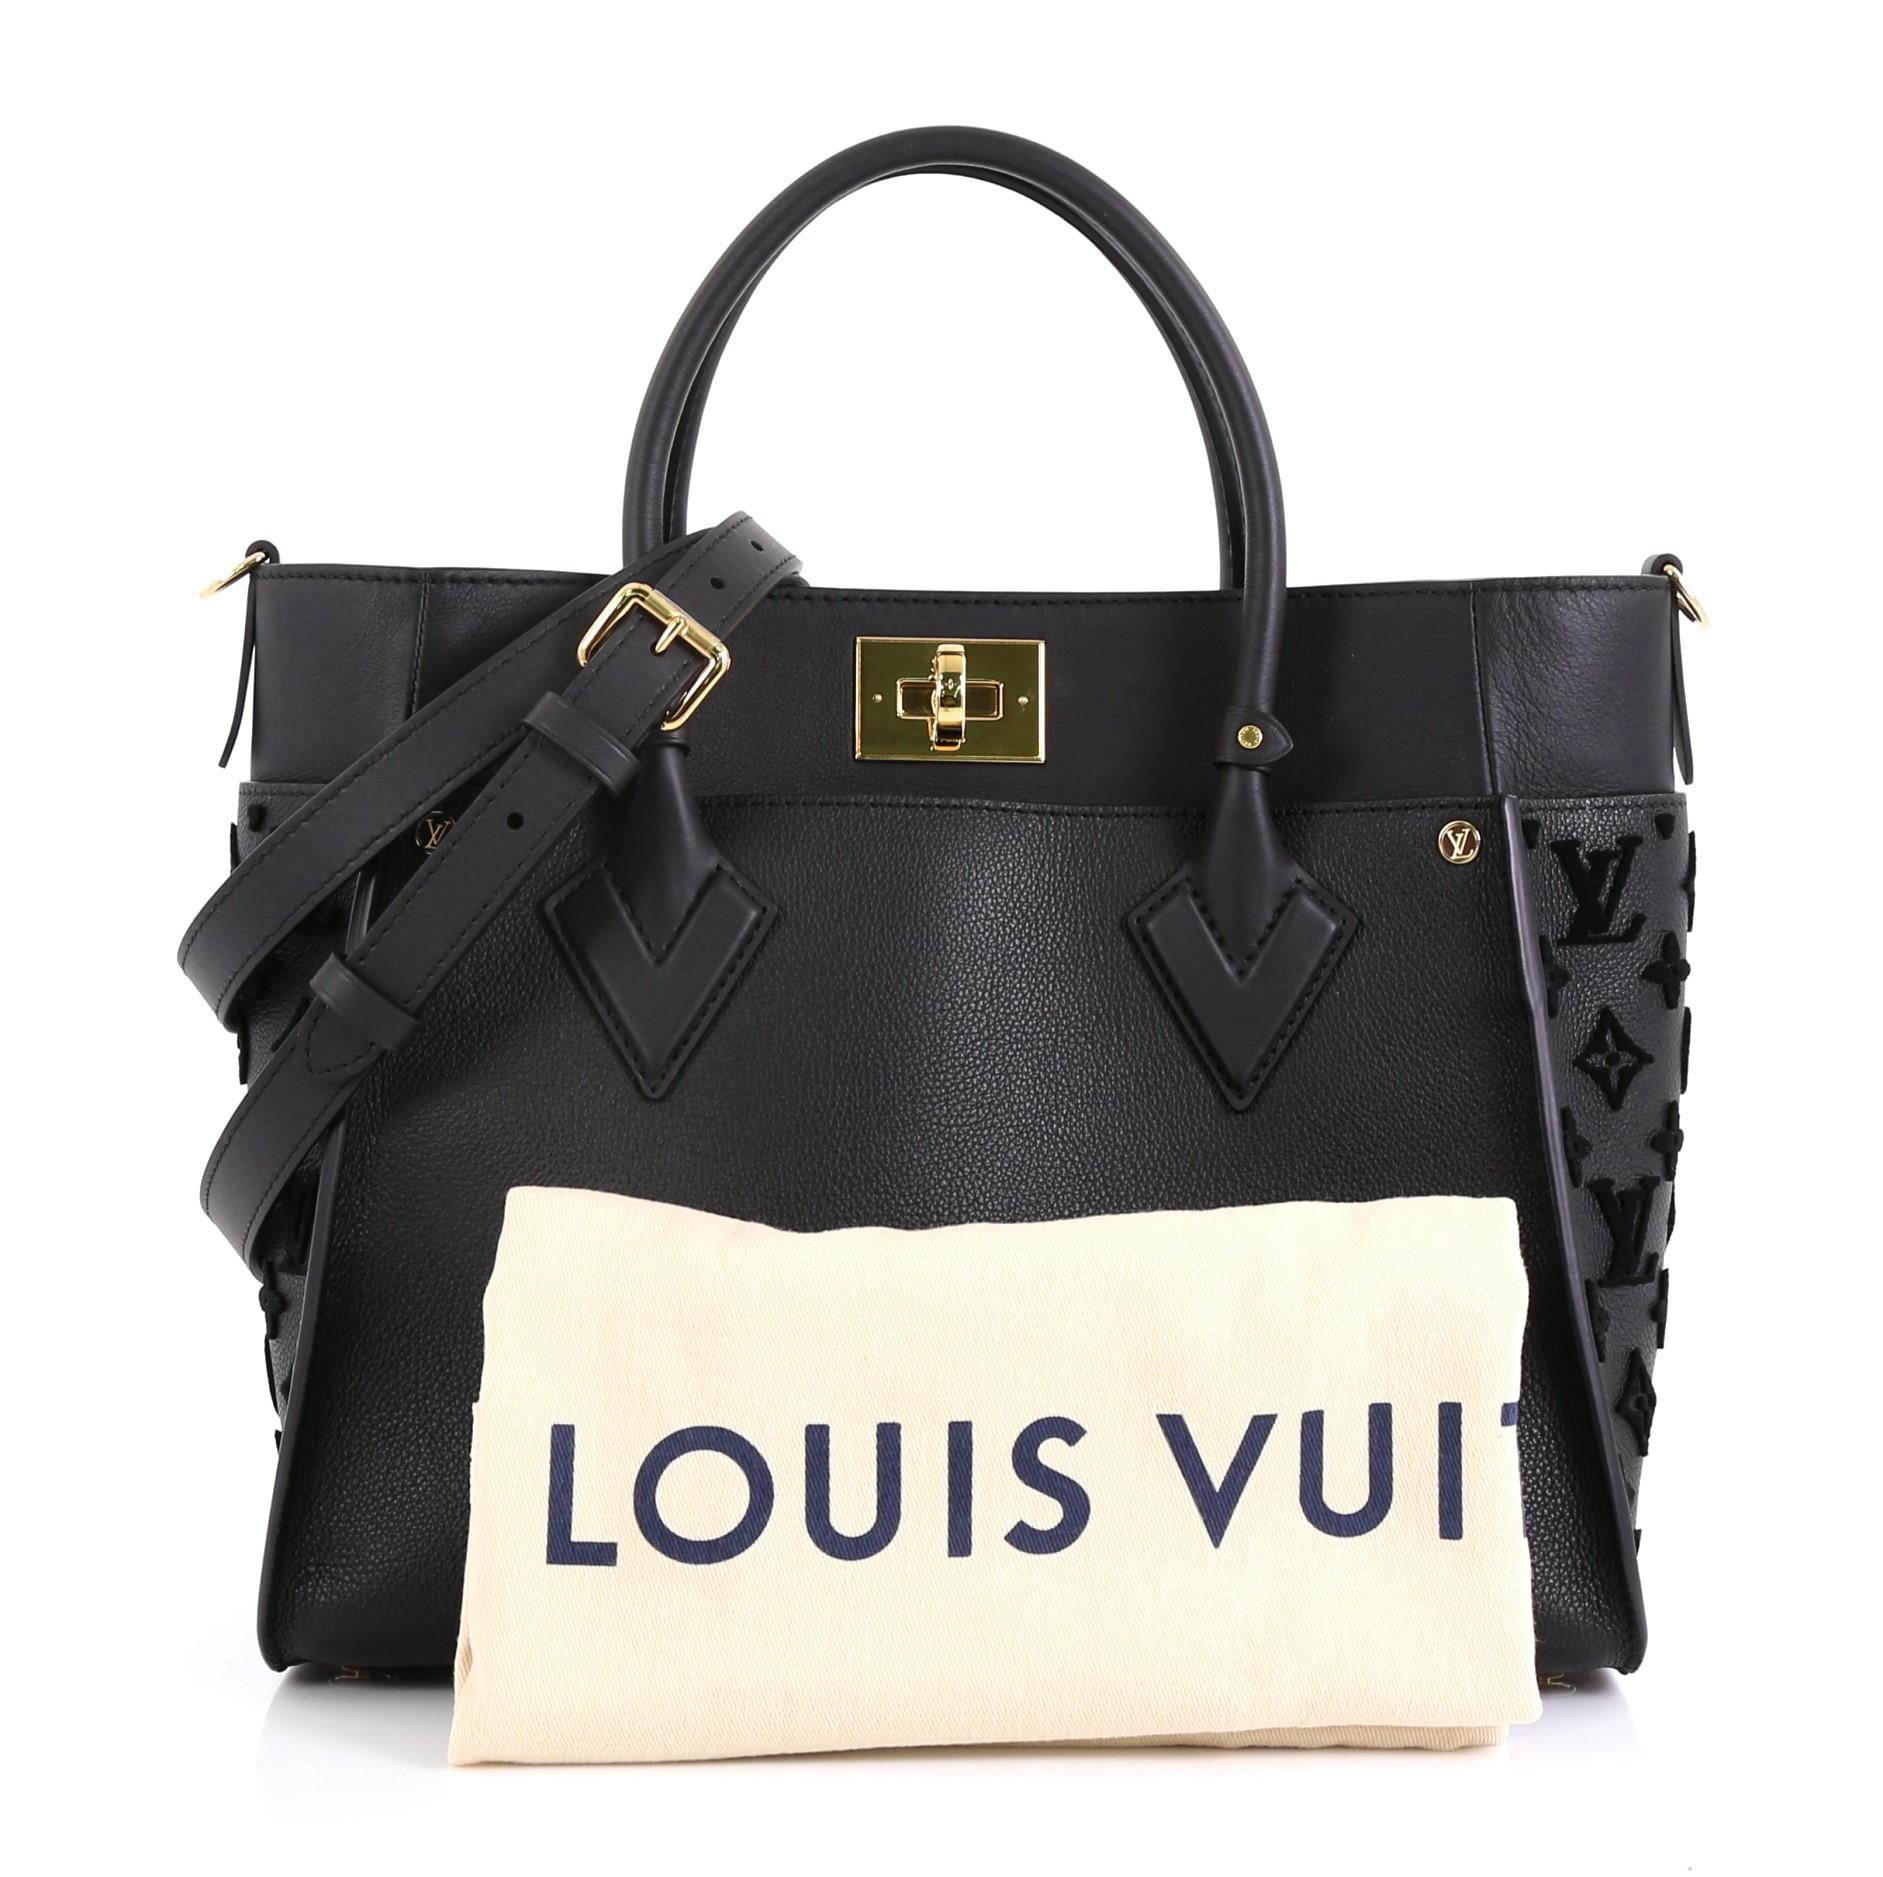 This Louis Vuitton On My Side Tote Monogram Tuffetage, crafted from black leather, features dual rolled handles and gold-tone hardware. Its turn-lock closure opens to a yellow microfiber interior with side zip and slip pockets. Authenticity code